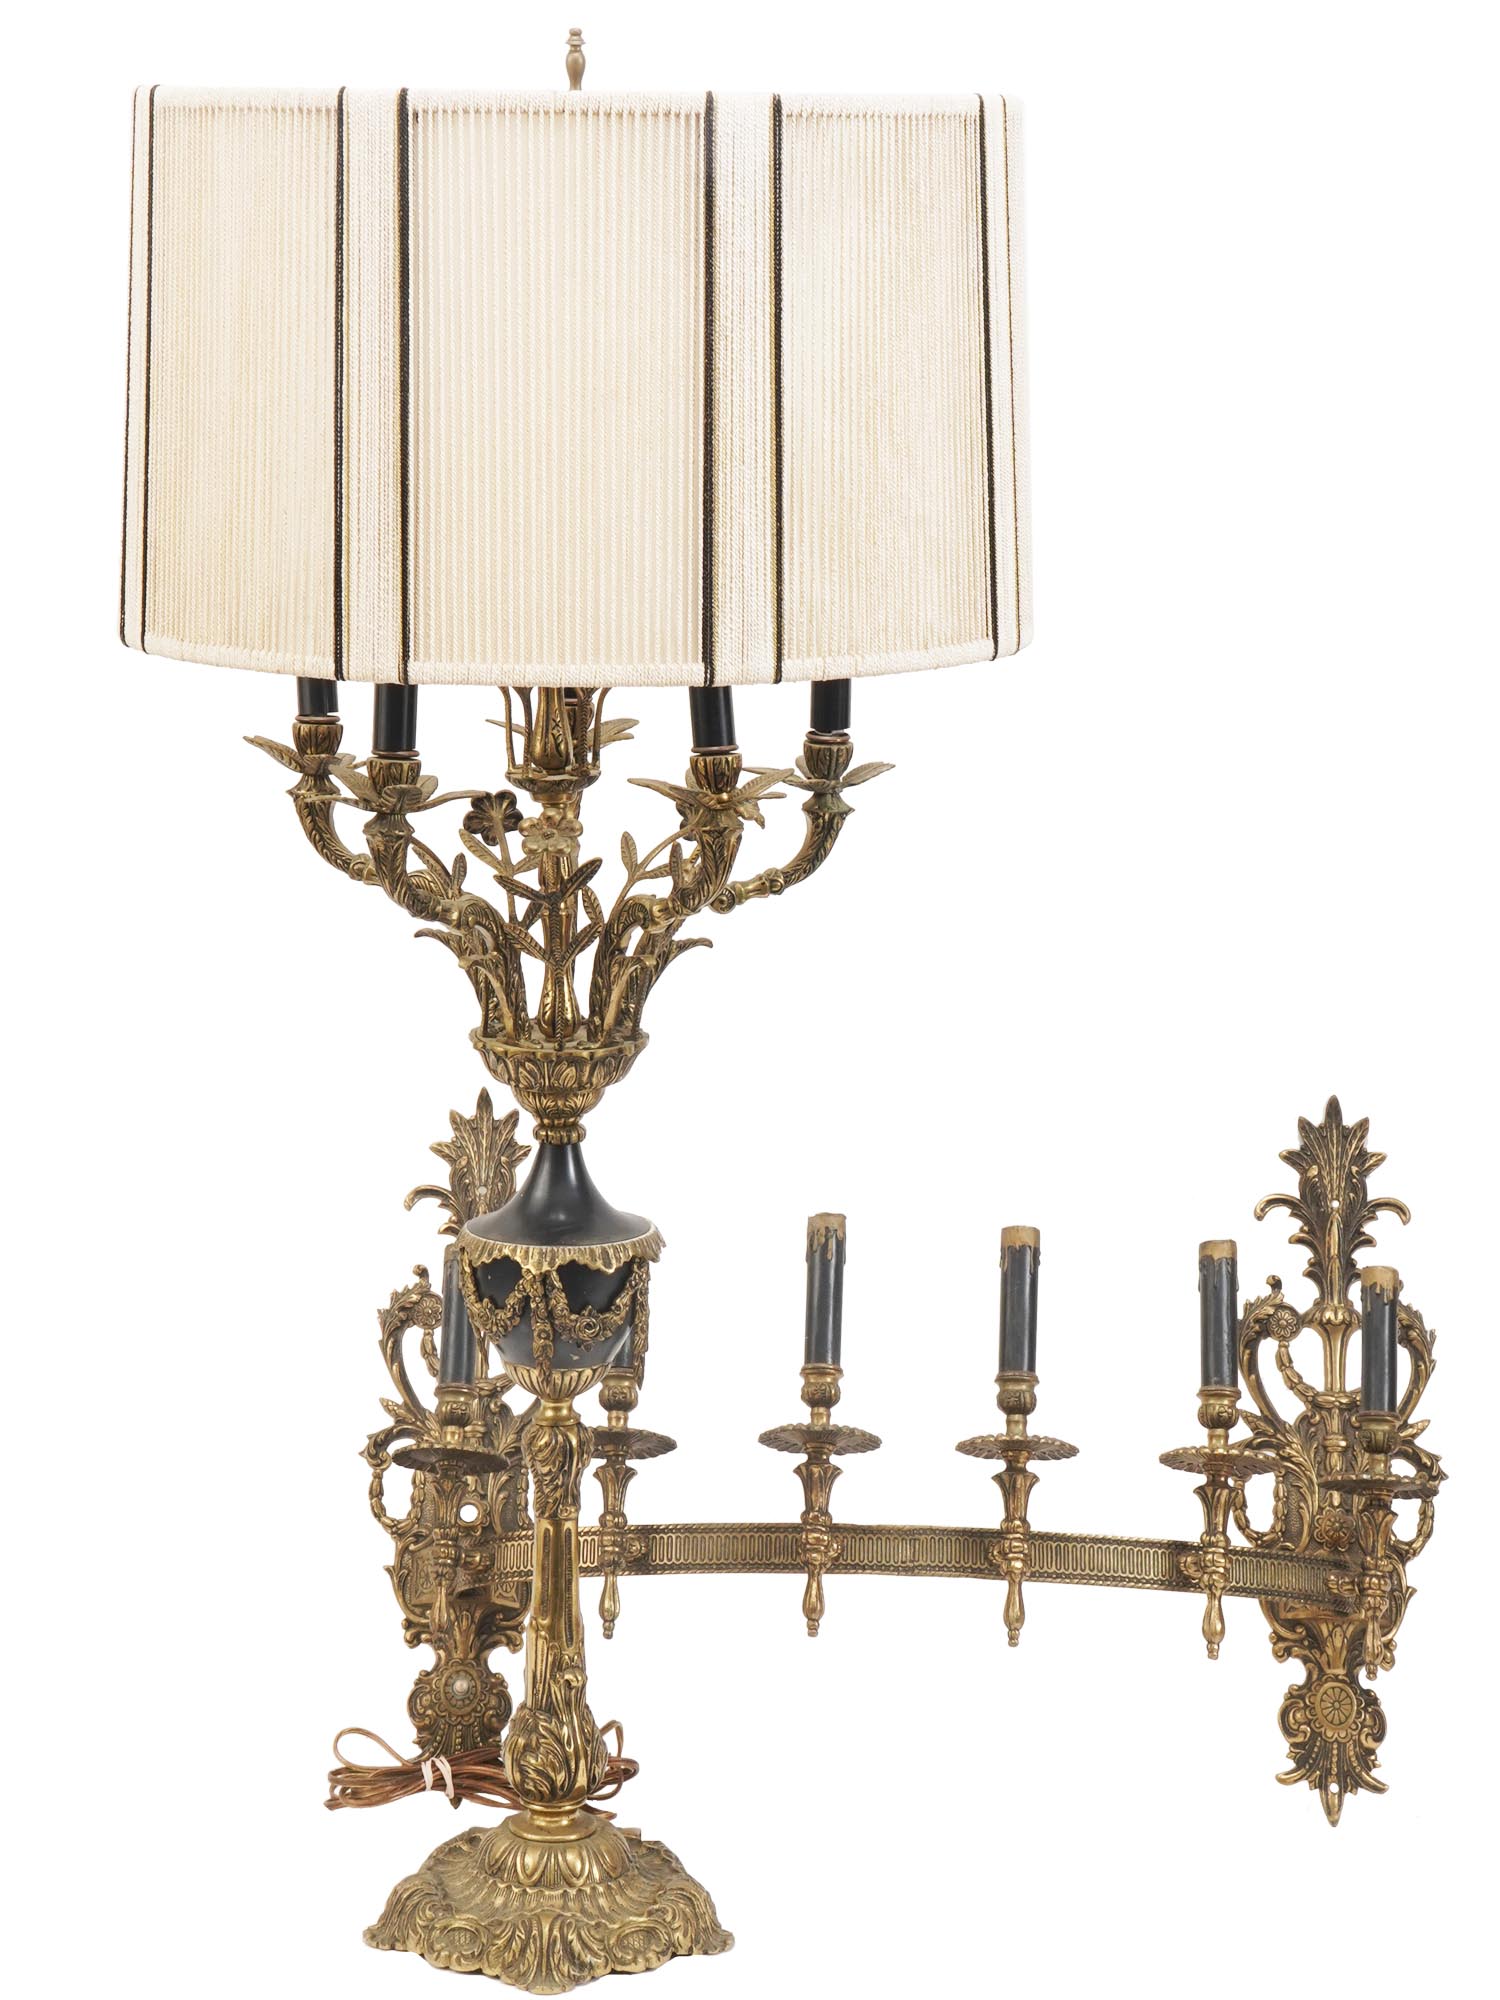 ELECTRIC WALL SCONCE AND TABLE LAMP WITH SHADE PIC-0